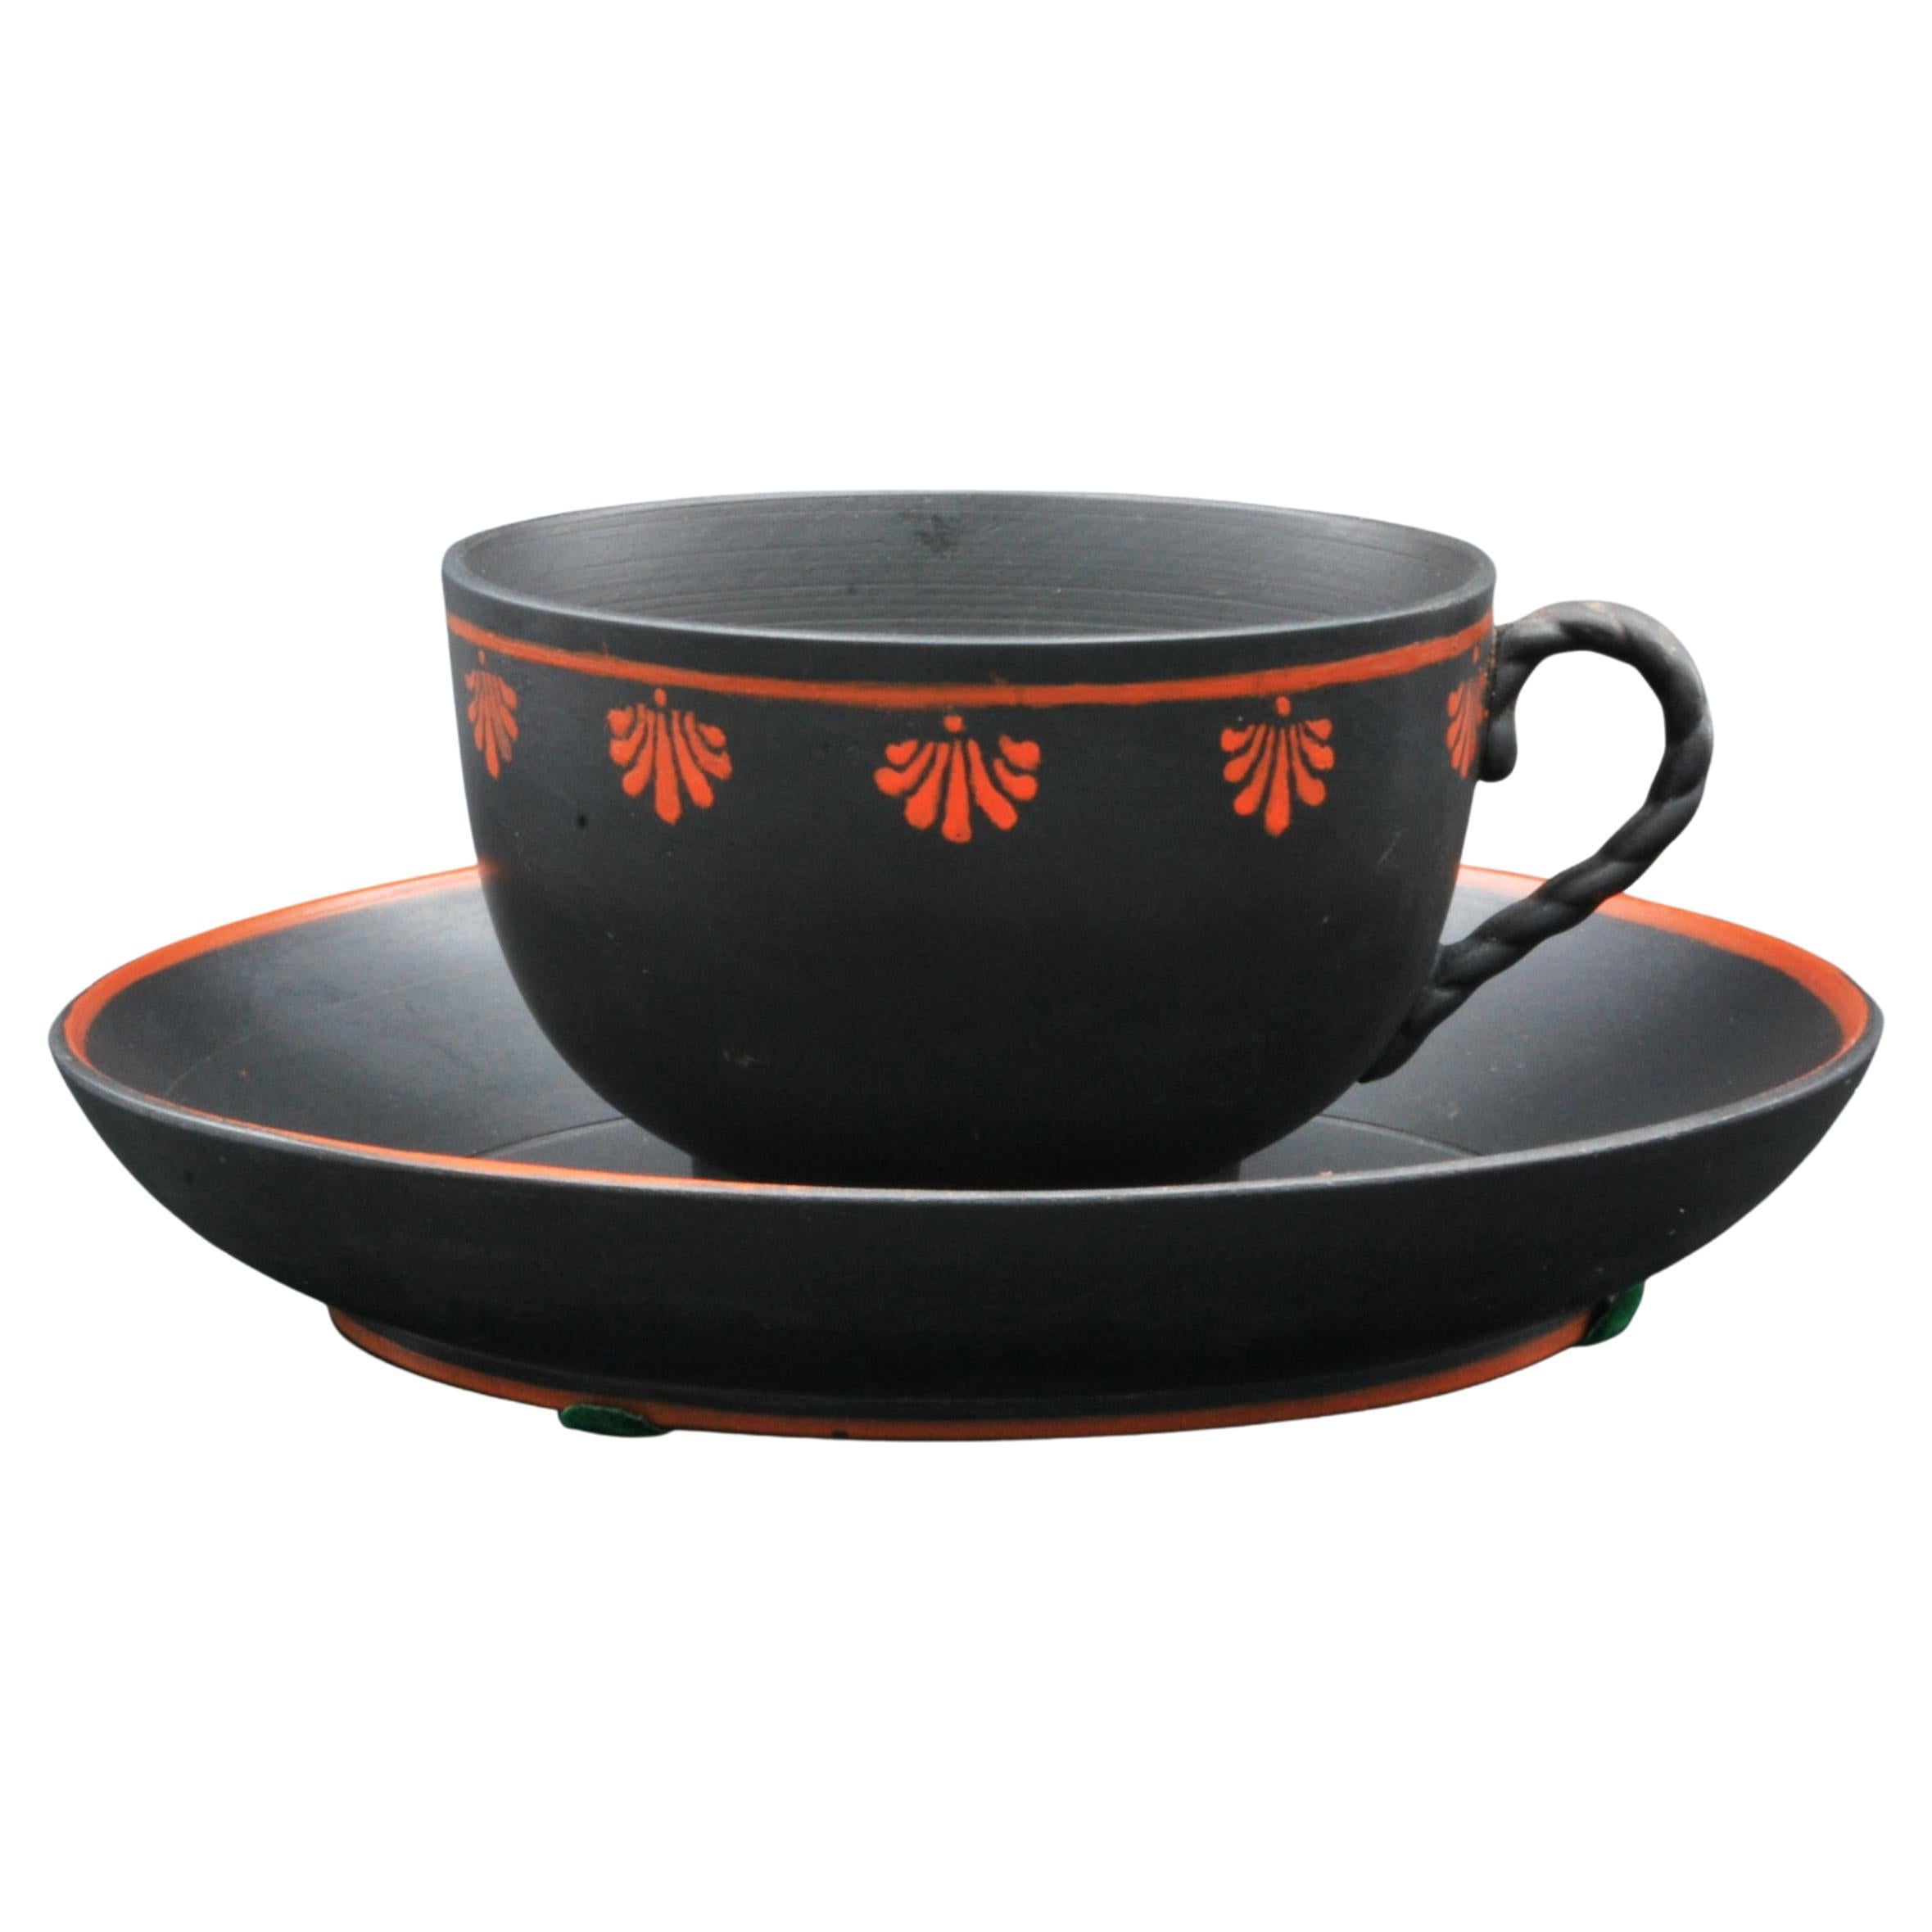 Encaustic Painted Cup and Saucer in Black Basalt, Wedgwood C1790 For Sale